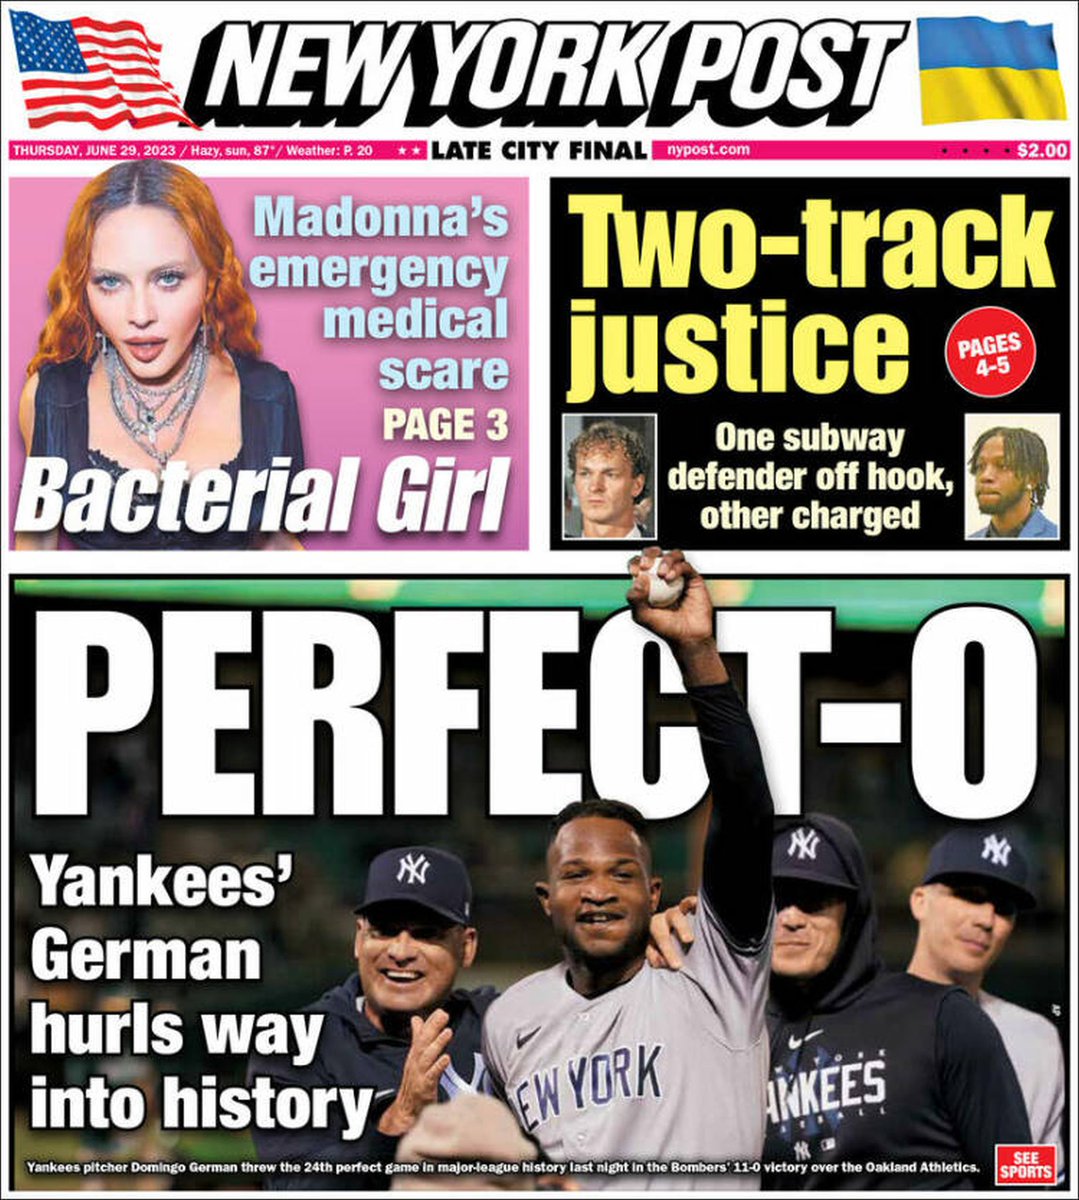 🇺🇸 Bacterial Girl

▫Madonna's emergency medical scare
▫@OriginalFresca
▫is.gd/2jq9IV 🇺🇸

#frontpagestoday #USA @nypost